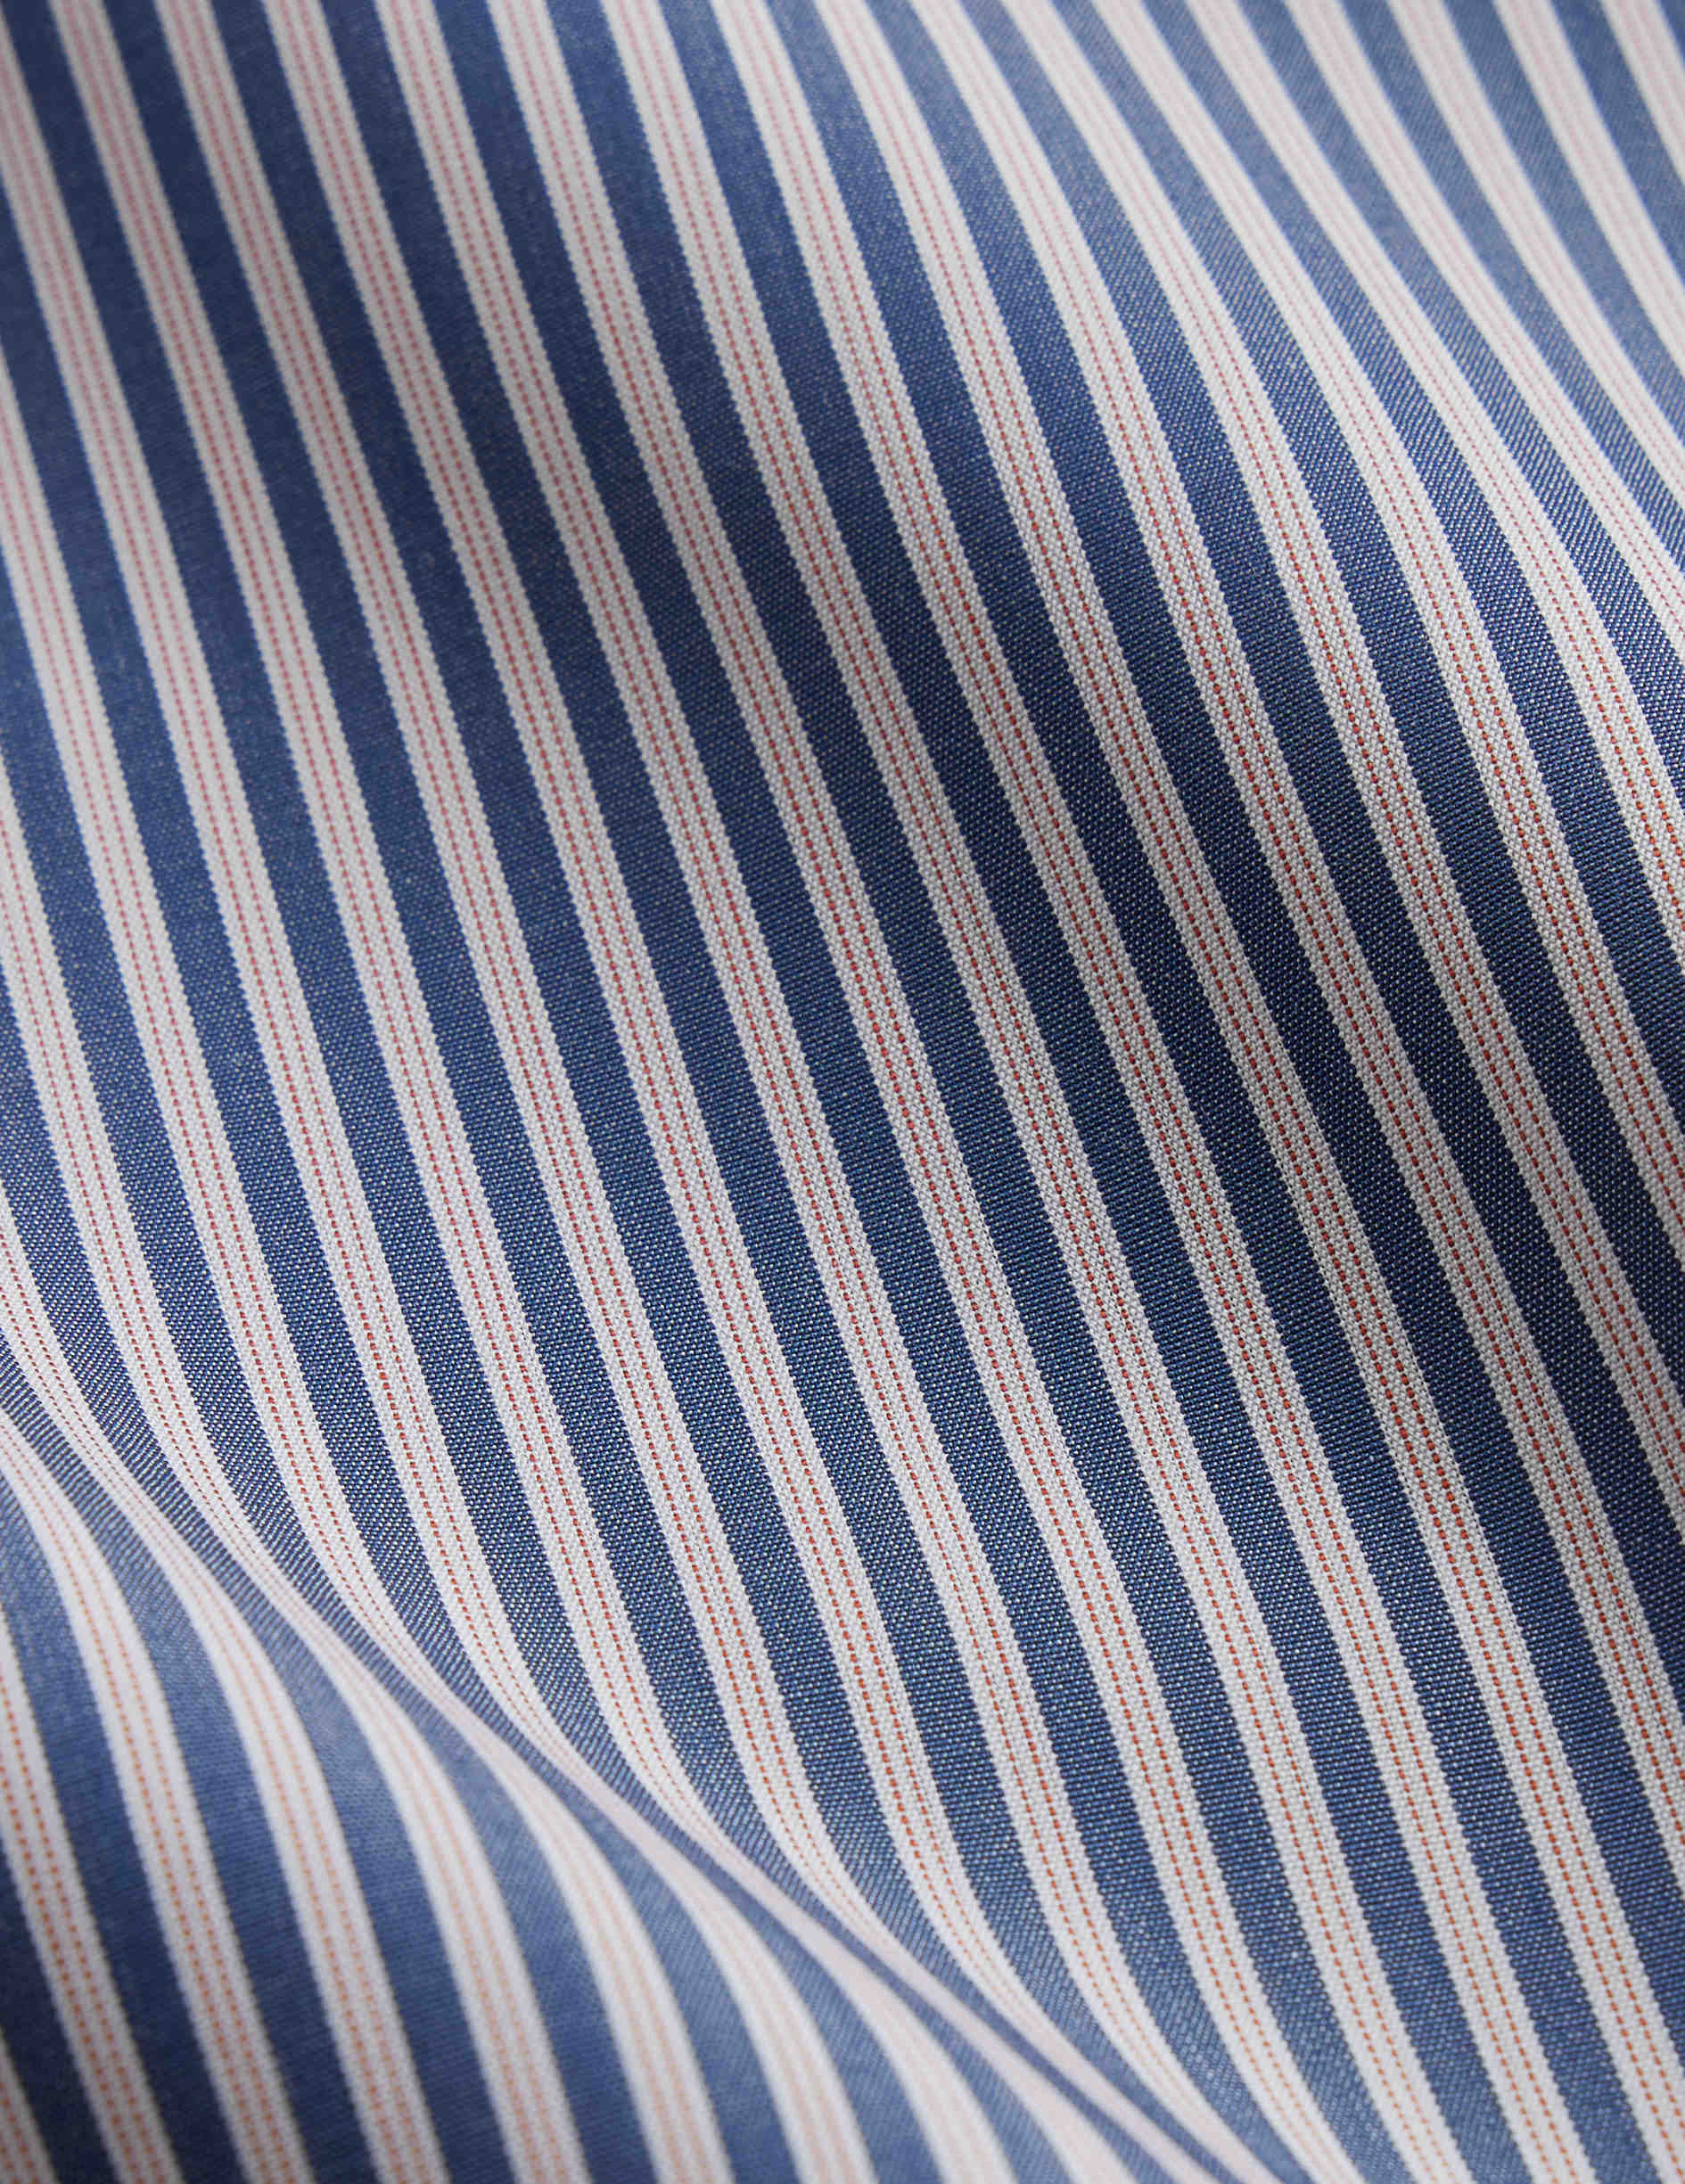 Fitted navy striped shirt - Poplin - Figaret Collar